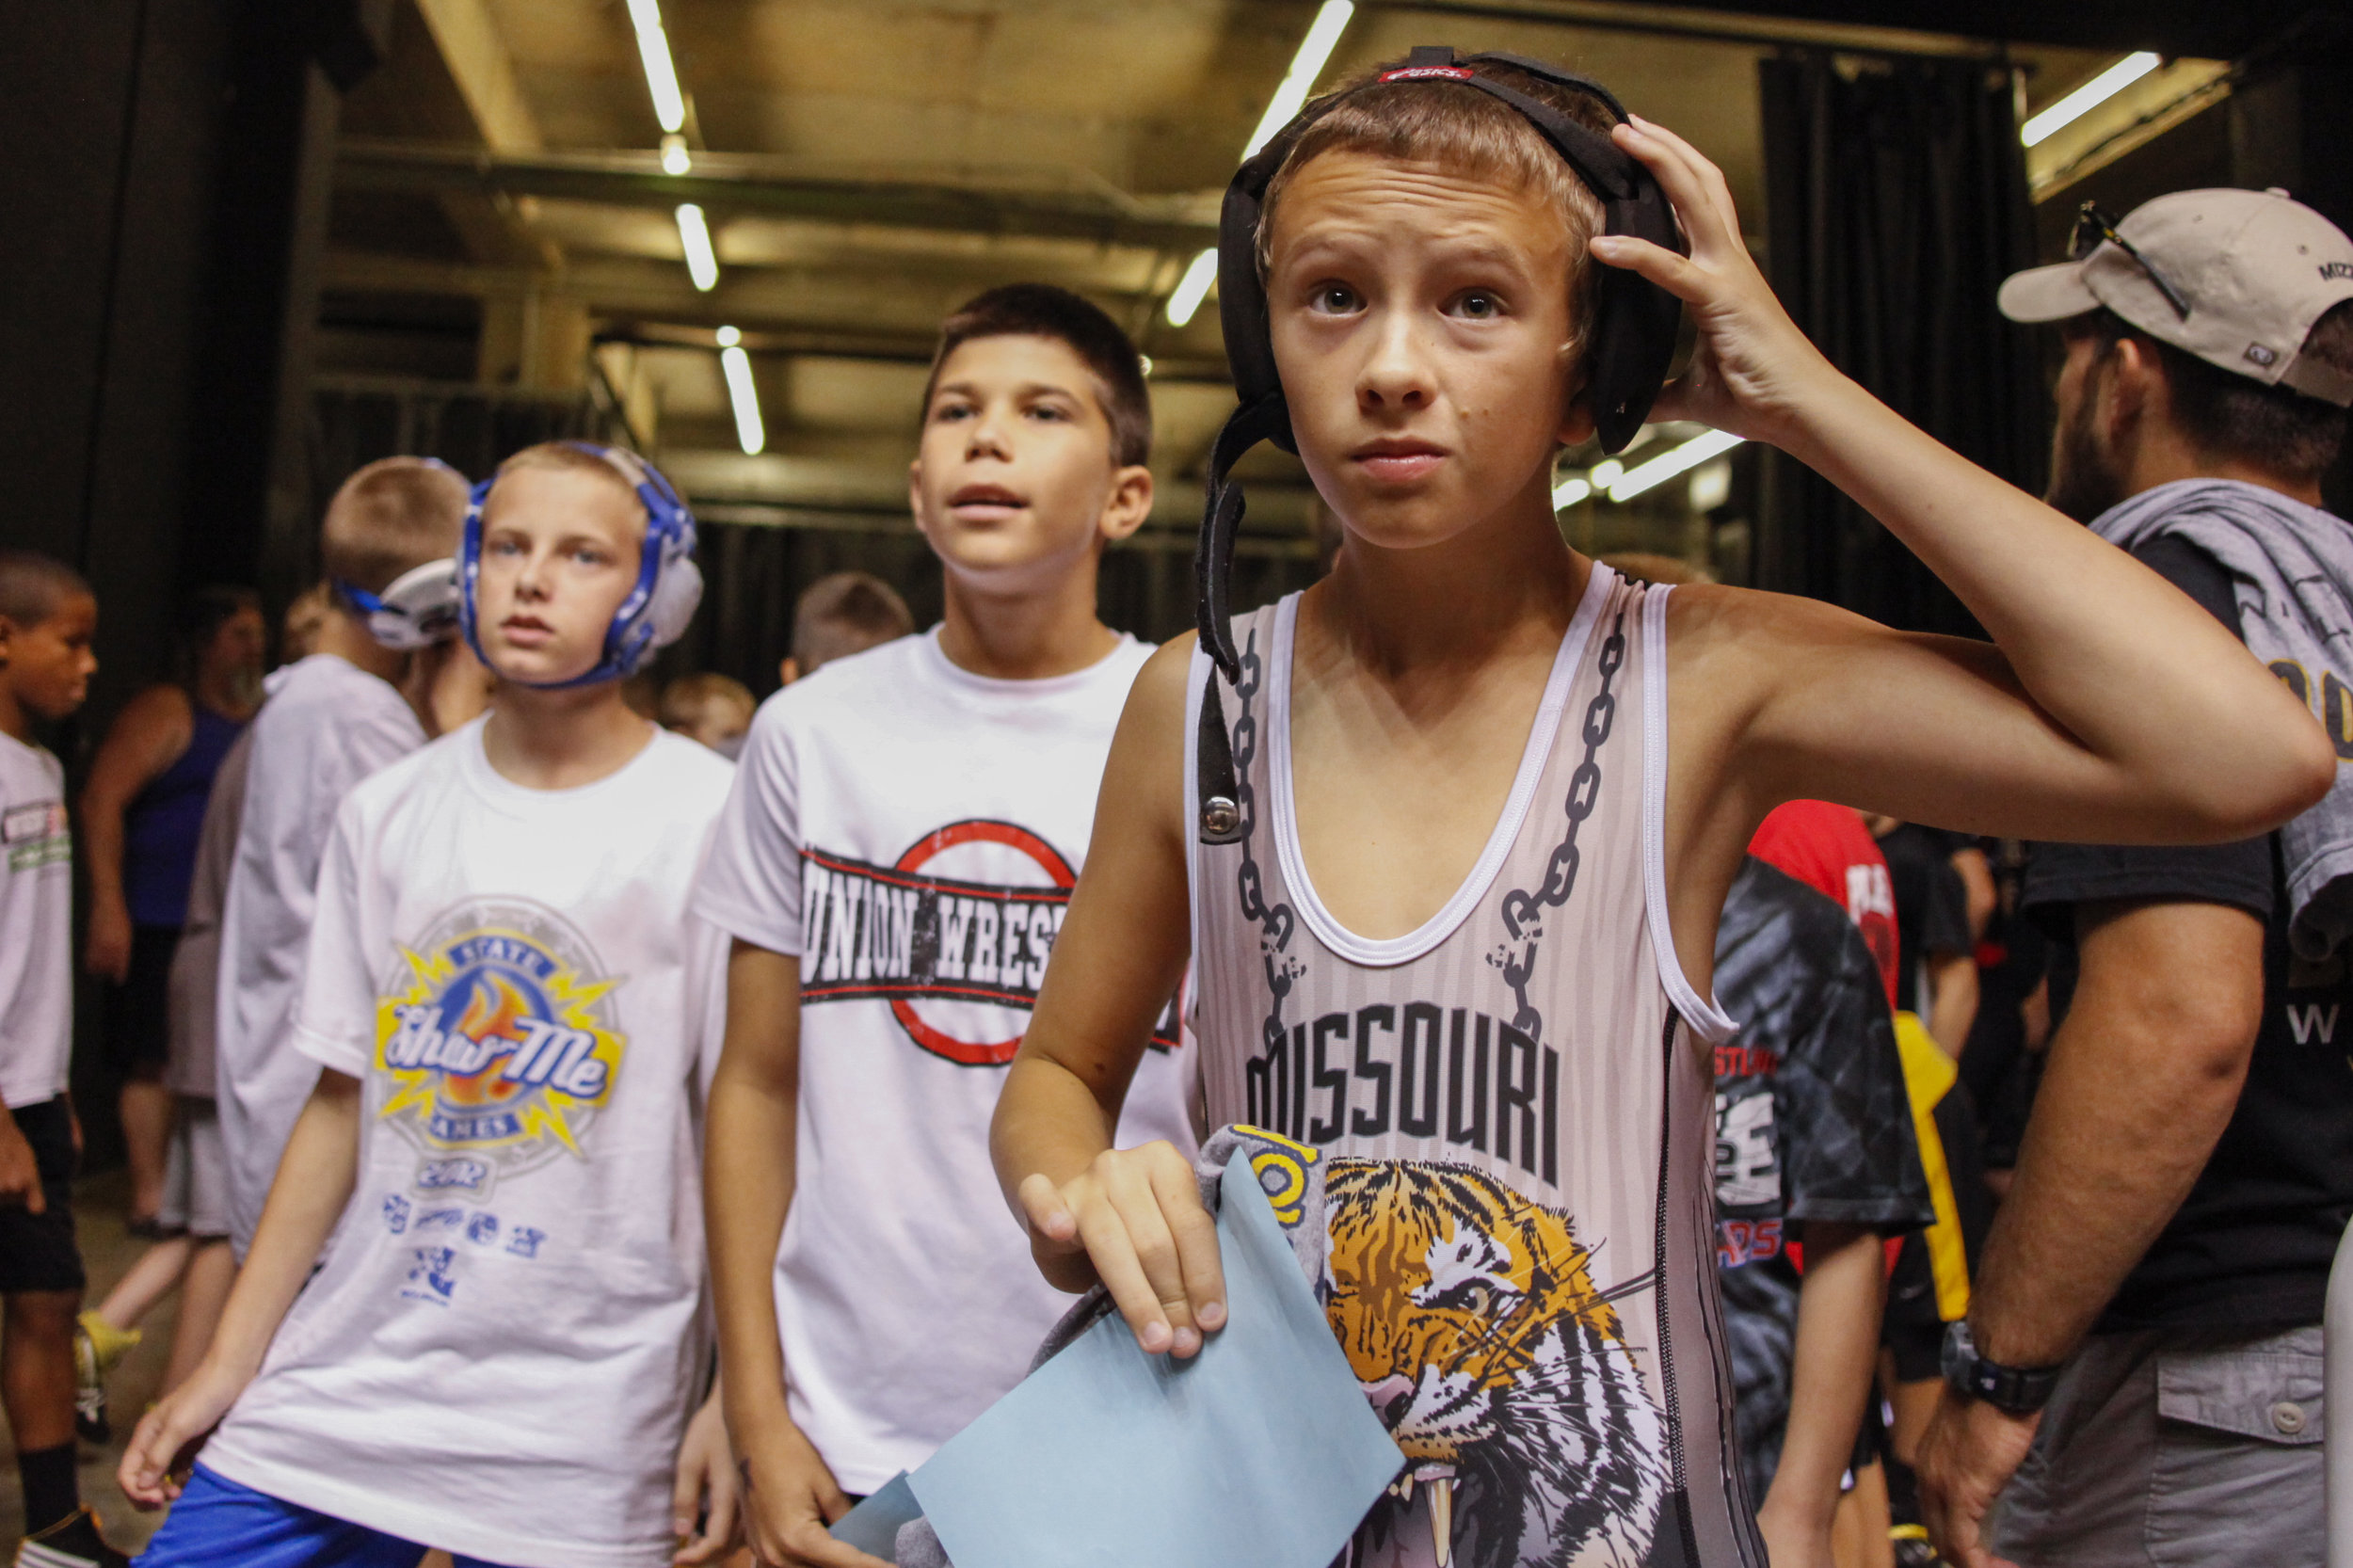  12-year-old Jake Justice, right, puts his gear on before he steps onto the mat for his first match of the day Saturday morning at the Show -Me State Games at the Hearnes Center. Jake has been wrestling since he was 7.     